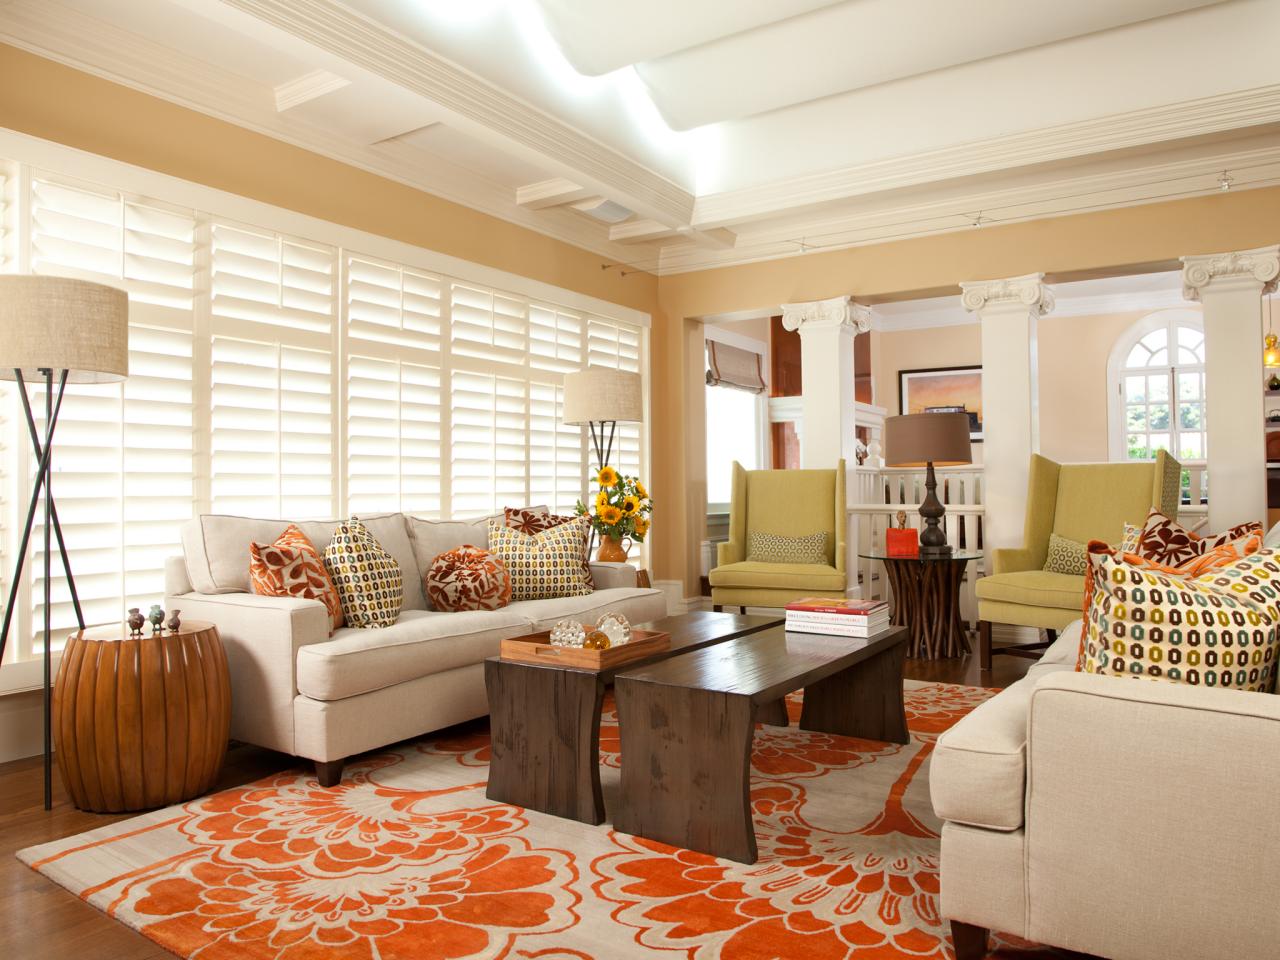 Plantation Shutters In A Living Room Dining Room